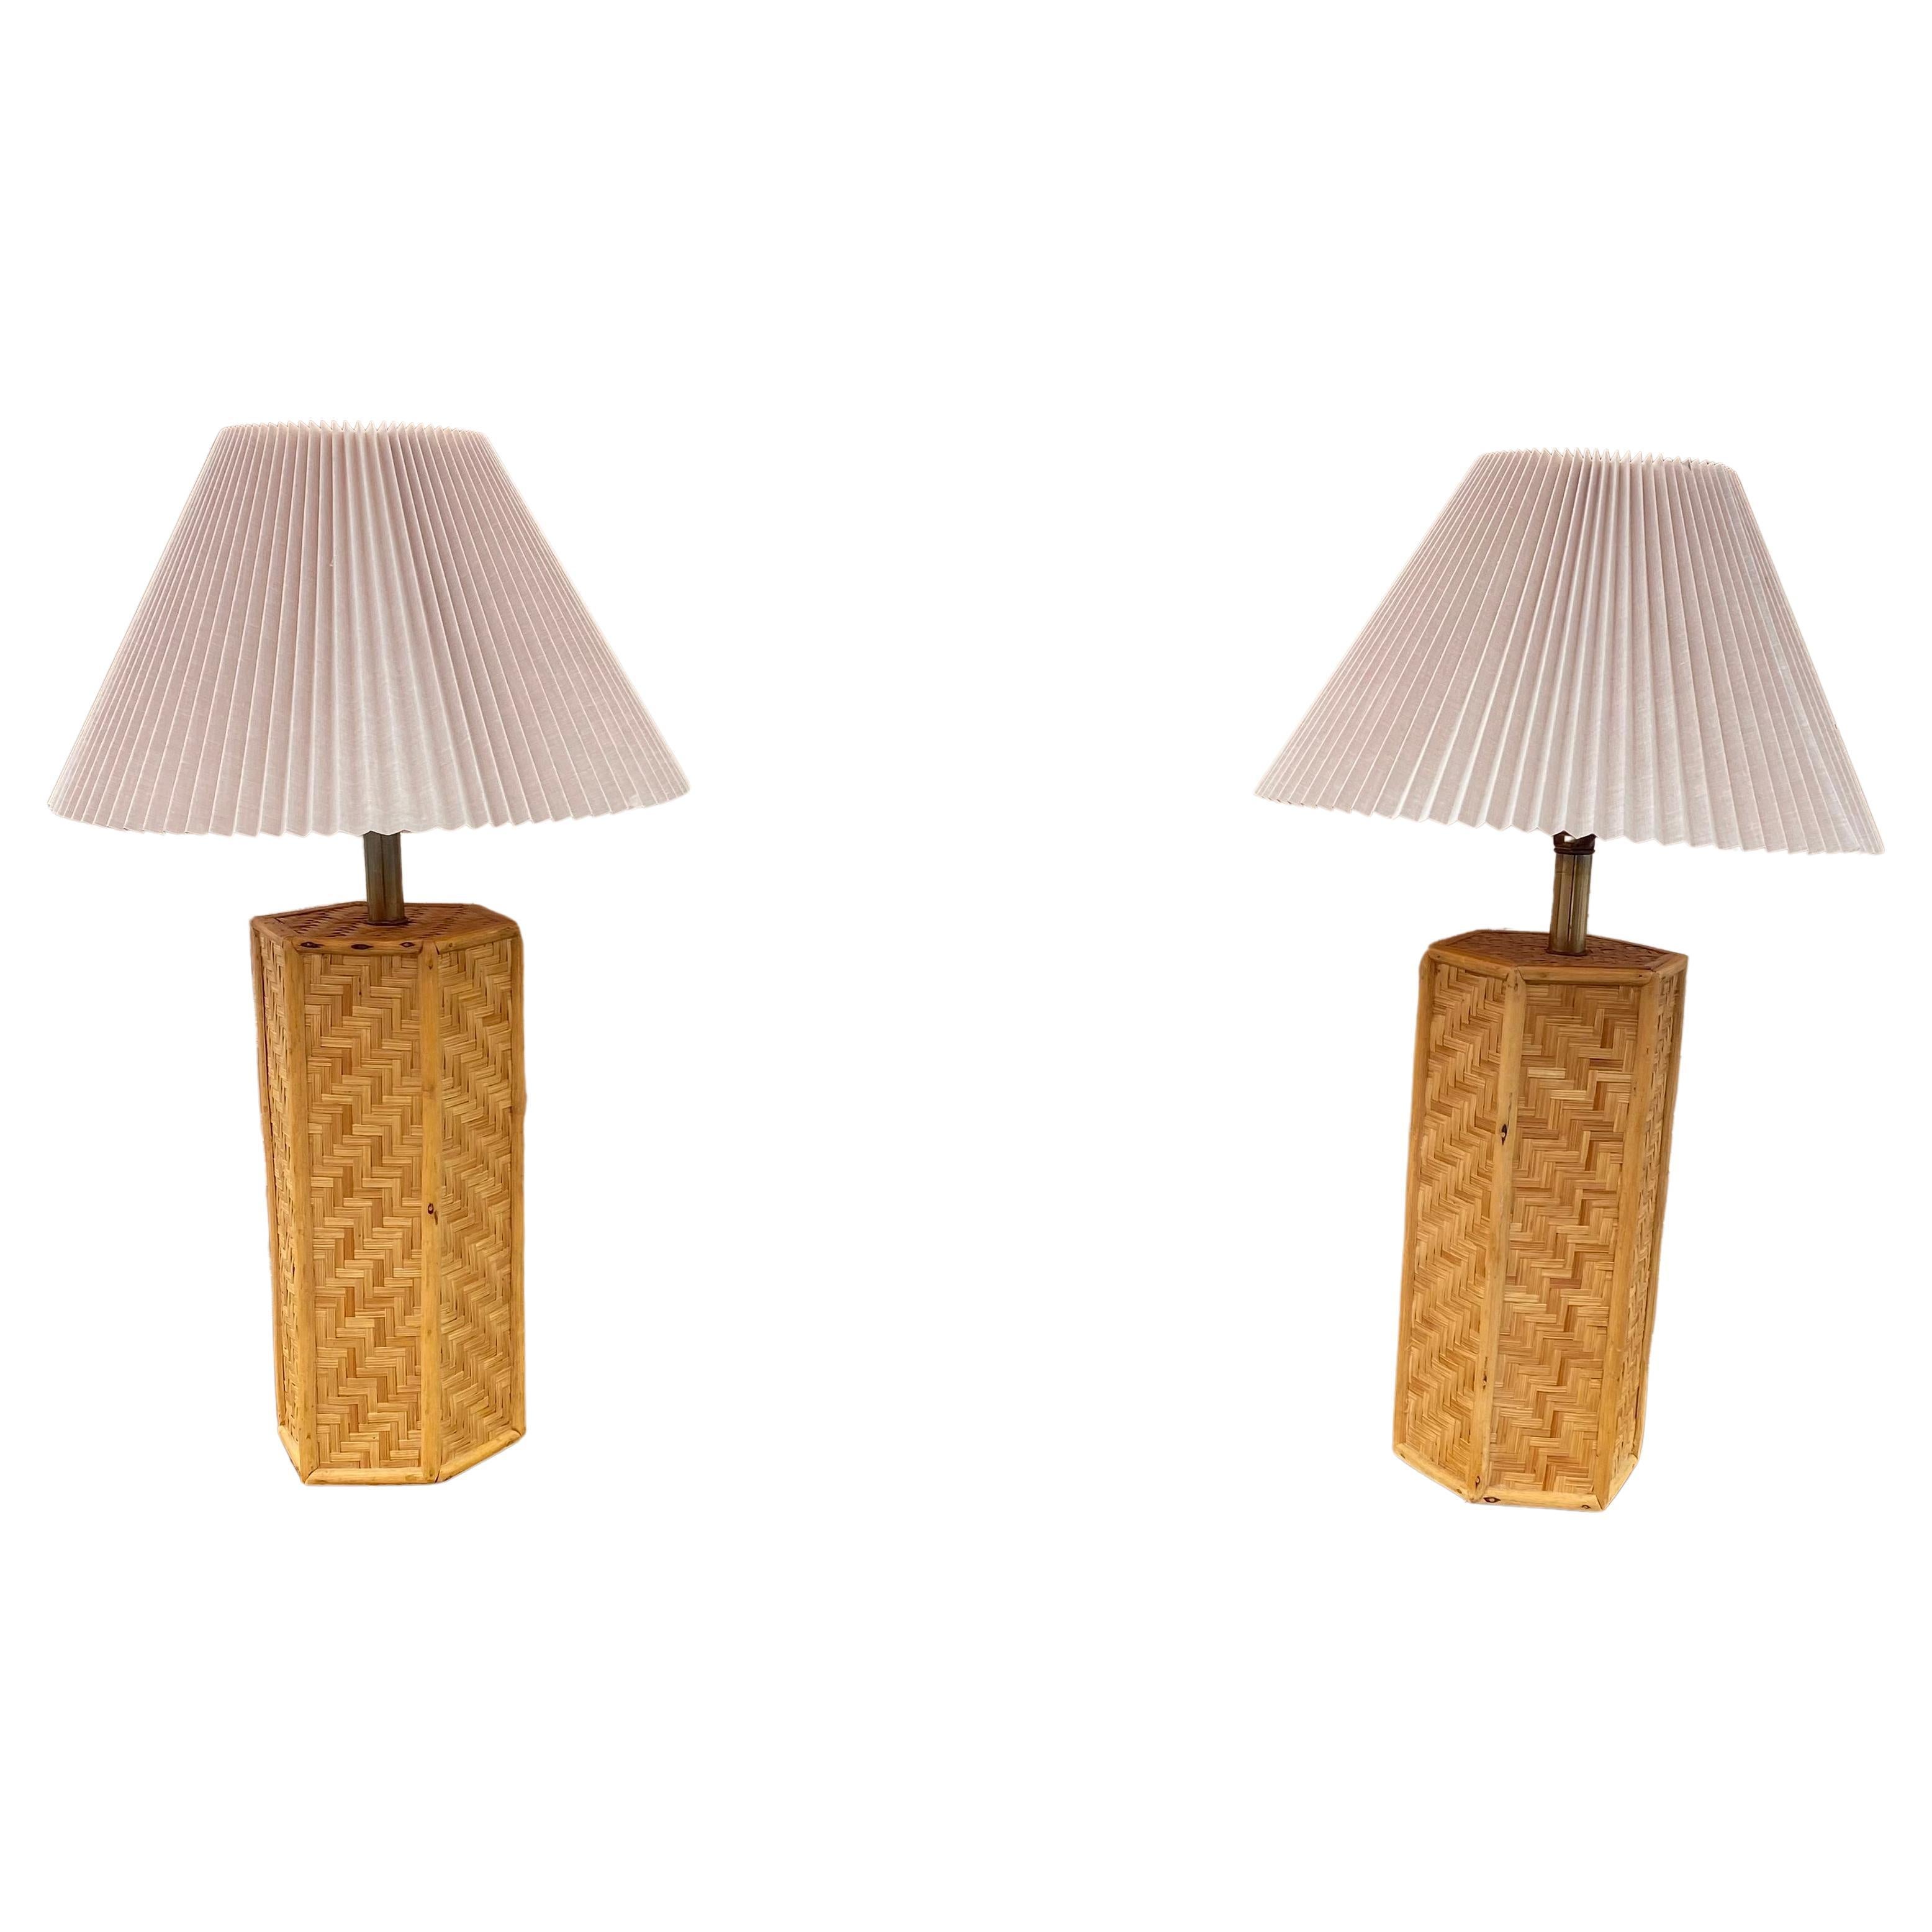 1970s Octagonal Rattan Weave Table Lamps, Set of 2 For Sale